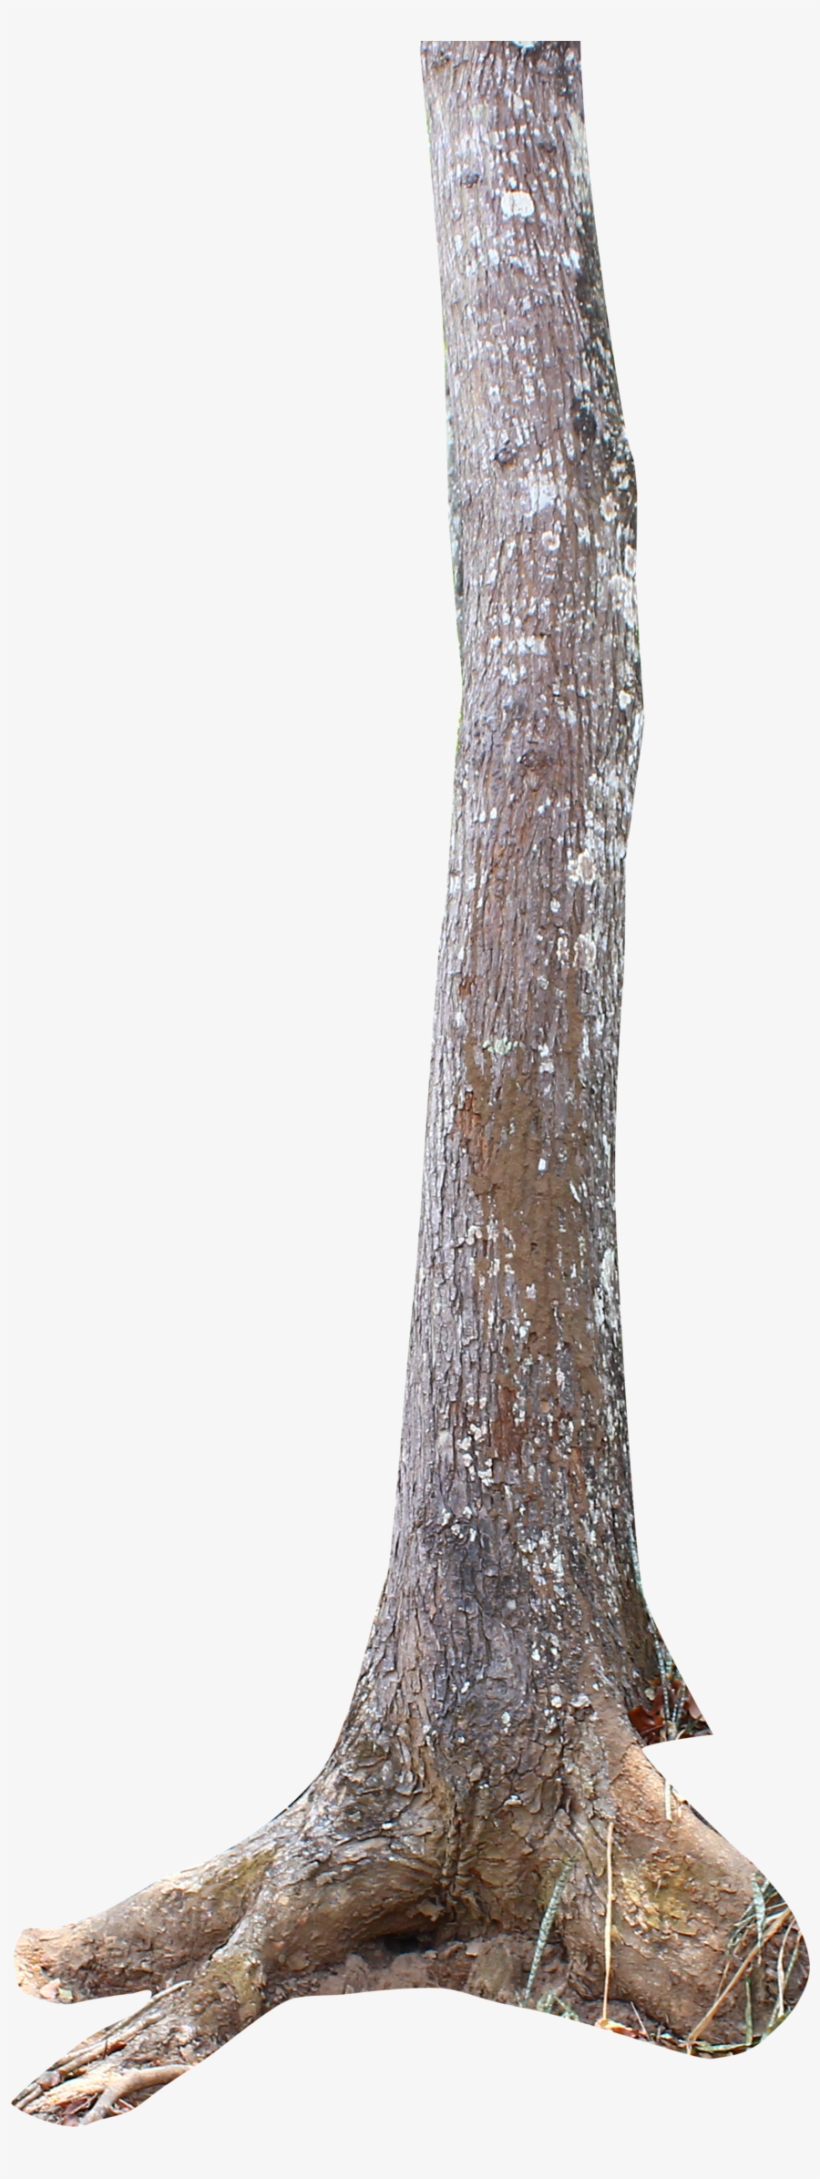 Thumb Image - Tree Trunk Png, transparent png #3564536